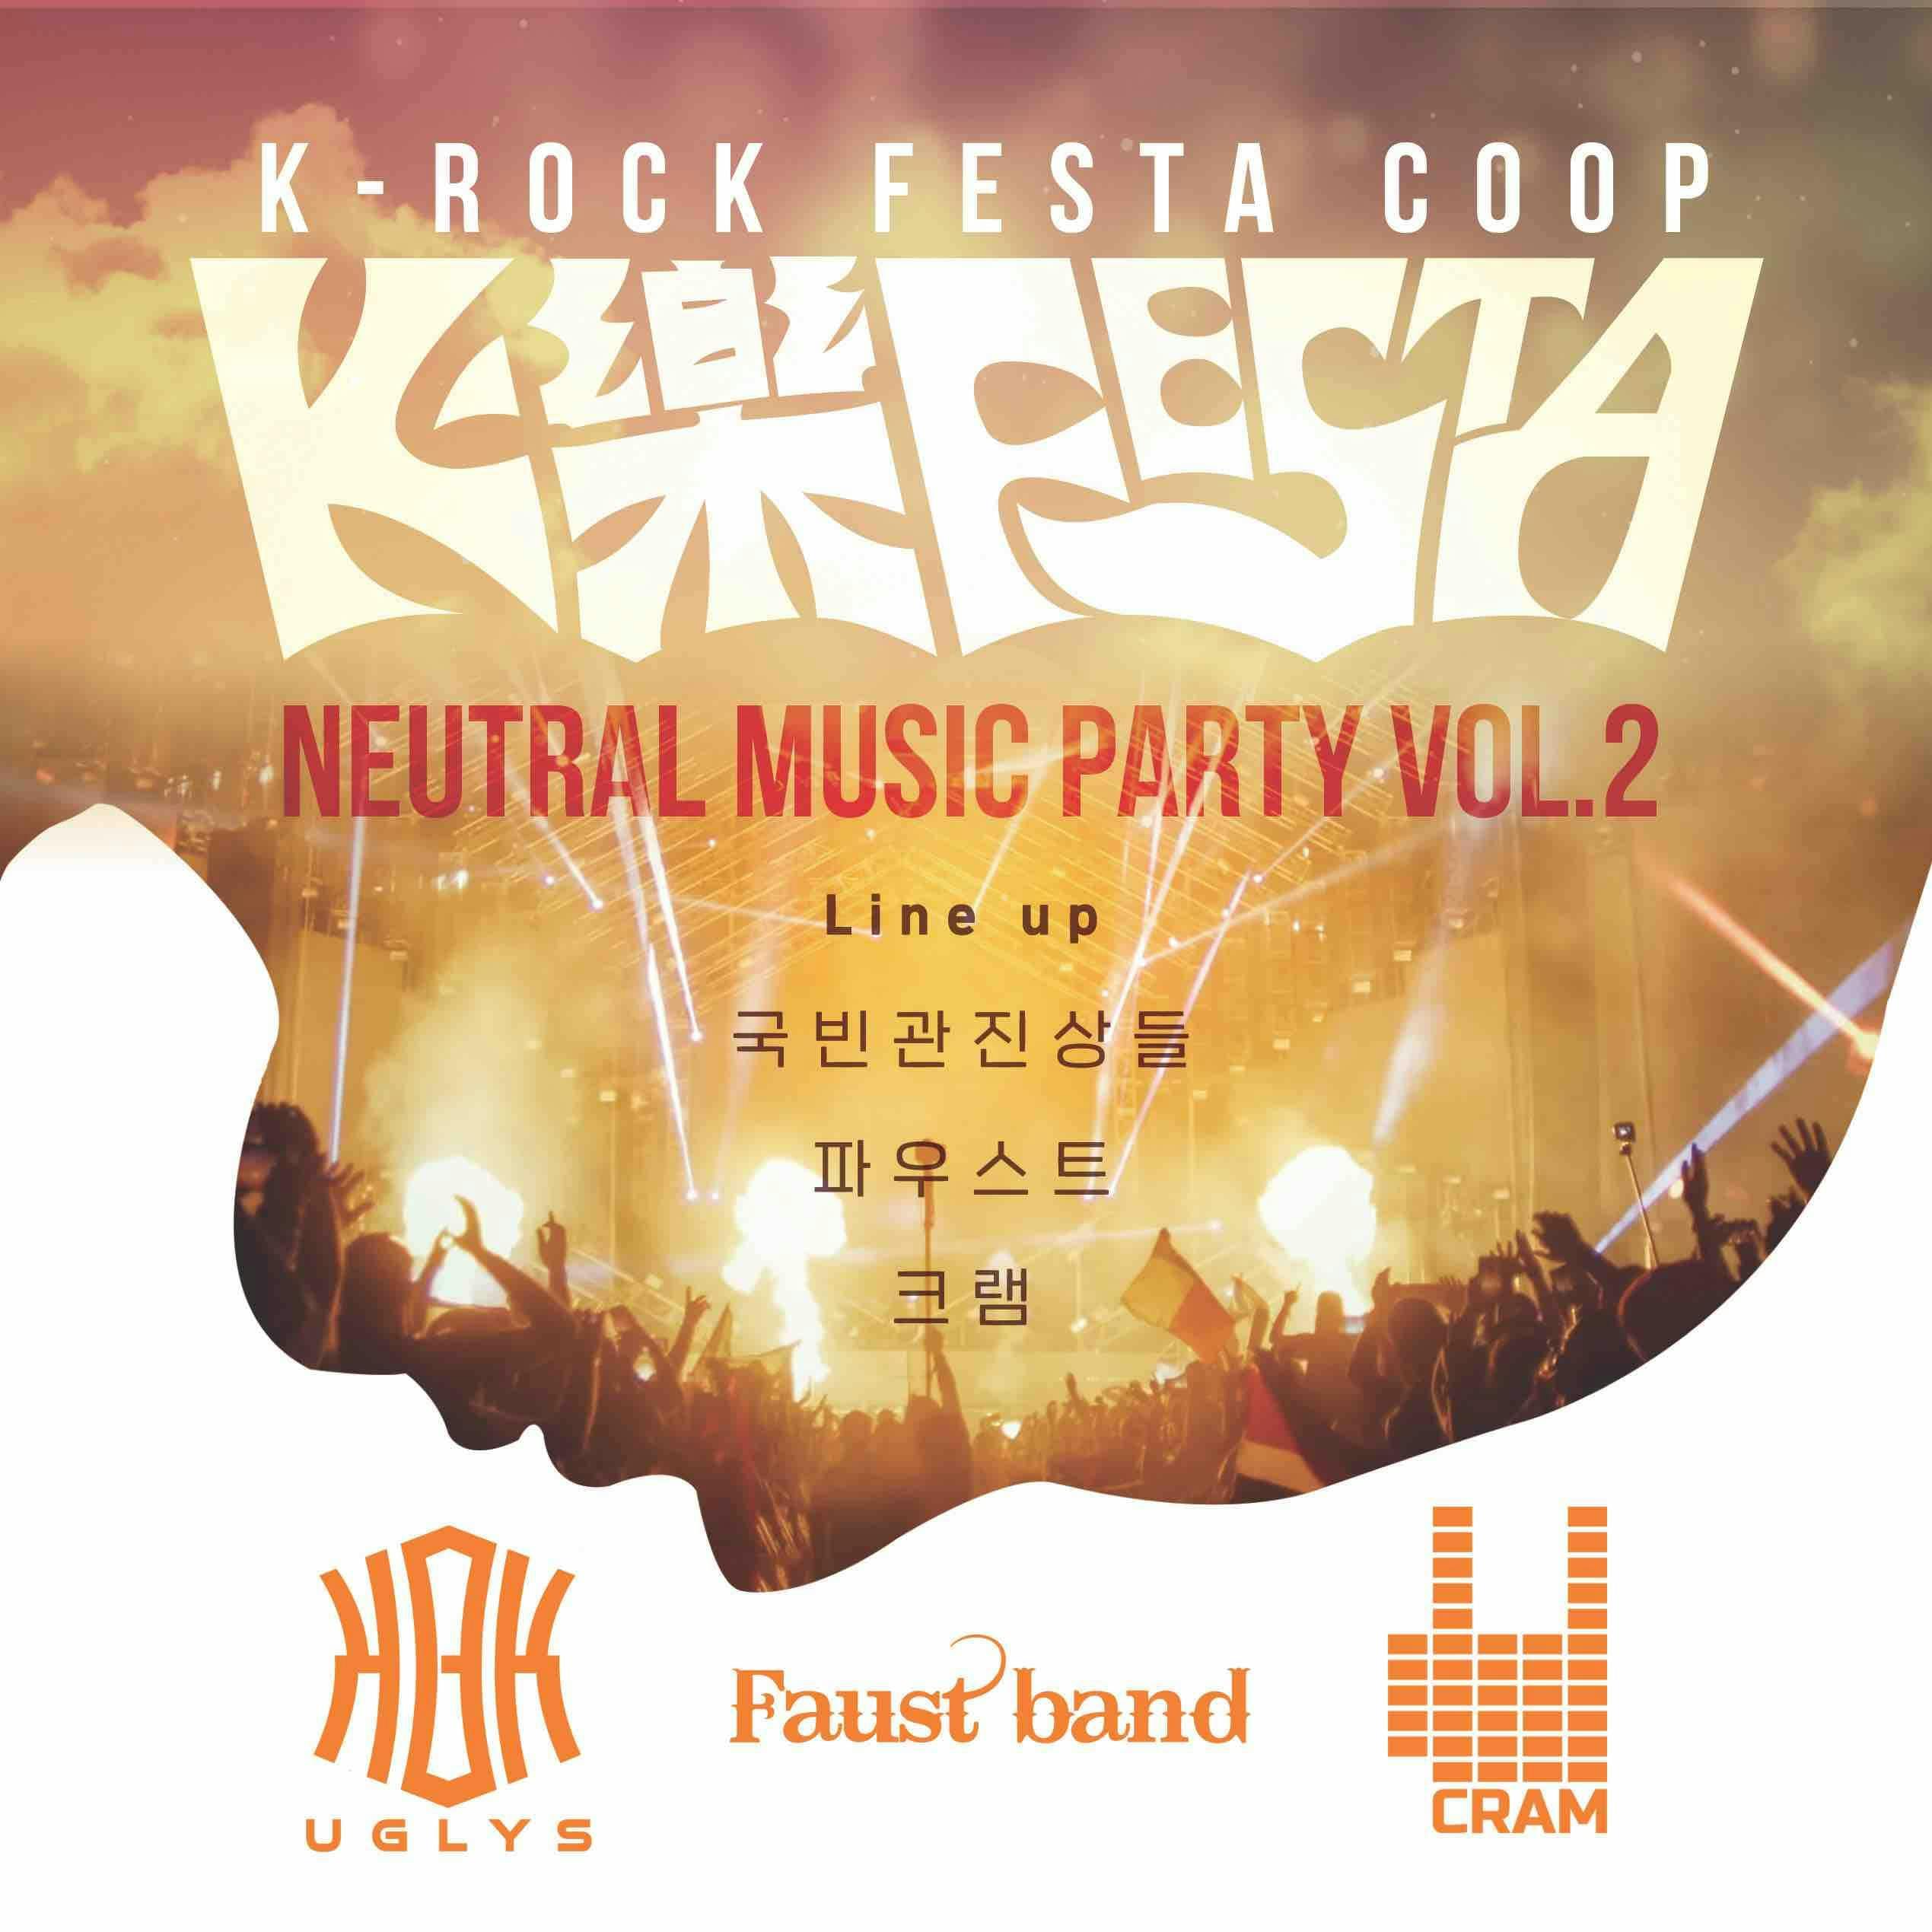 NEUTRAL MUSIC PARTY VOL.2 TICKET